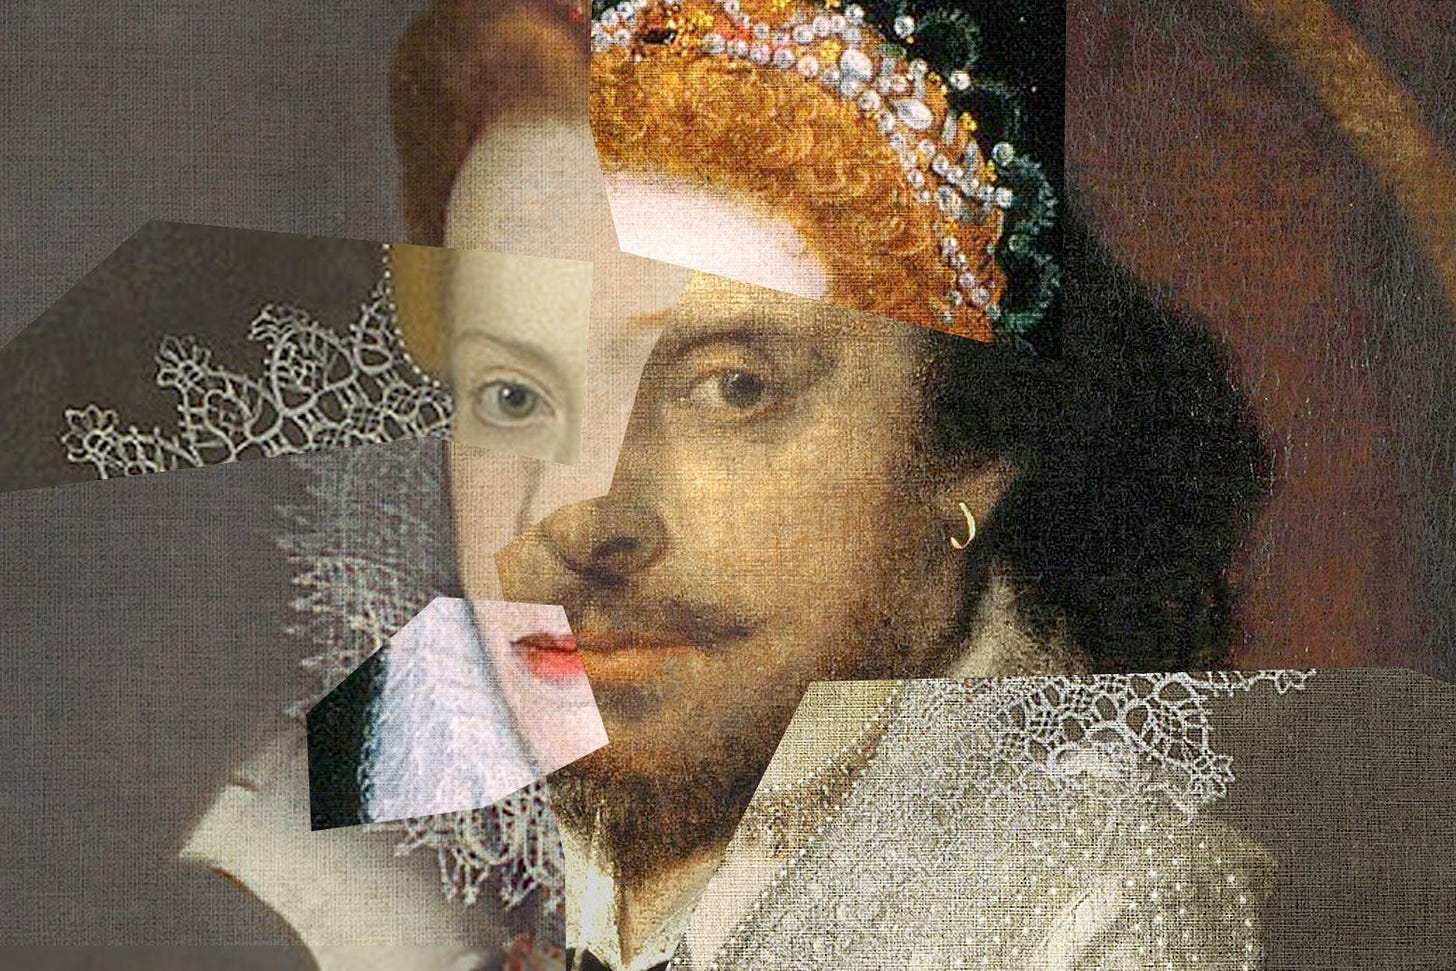 A collage of Shakespeare's face is composed of pieces of all kinds of other portraits including historical women.